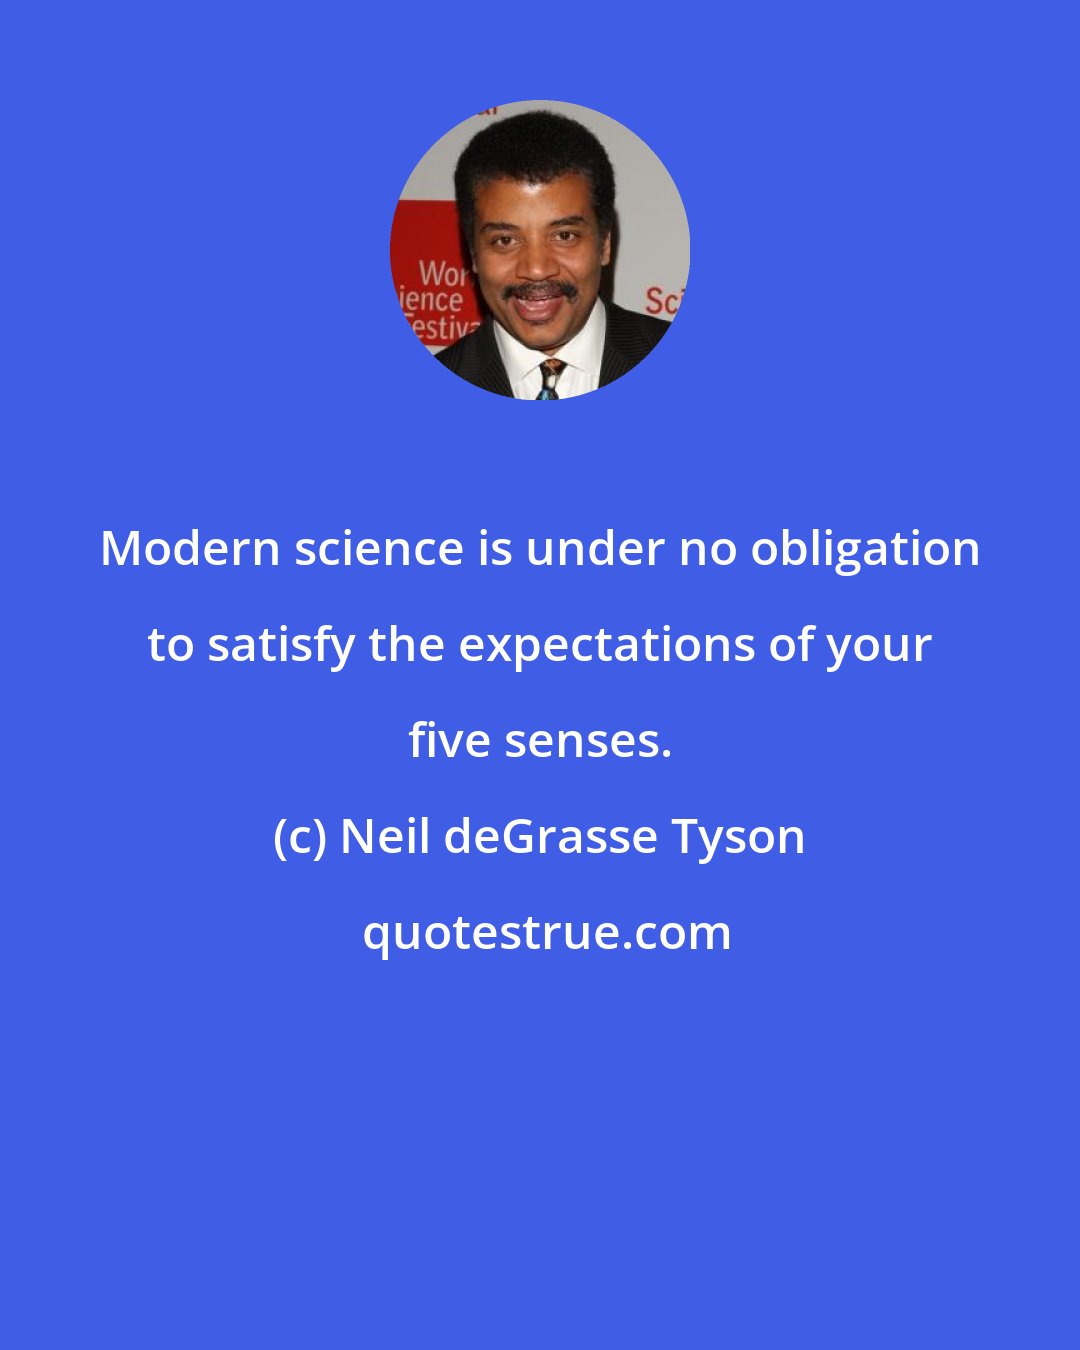 Neil deGrasse Tyson: Modern science is under no obligation to satisfy the expectations of your five senses.